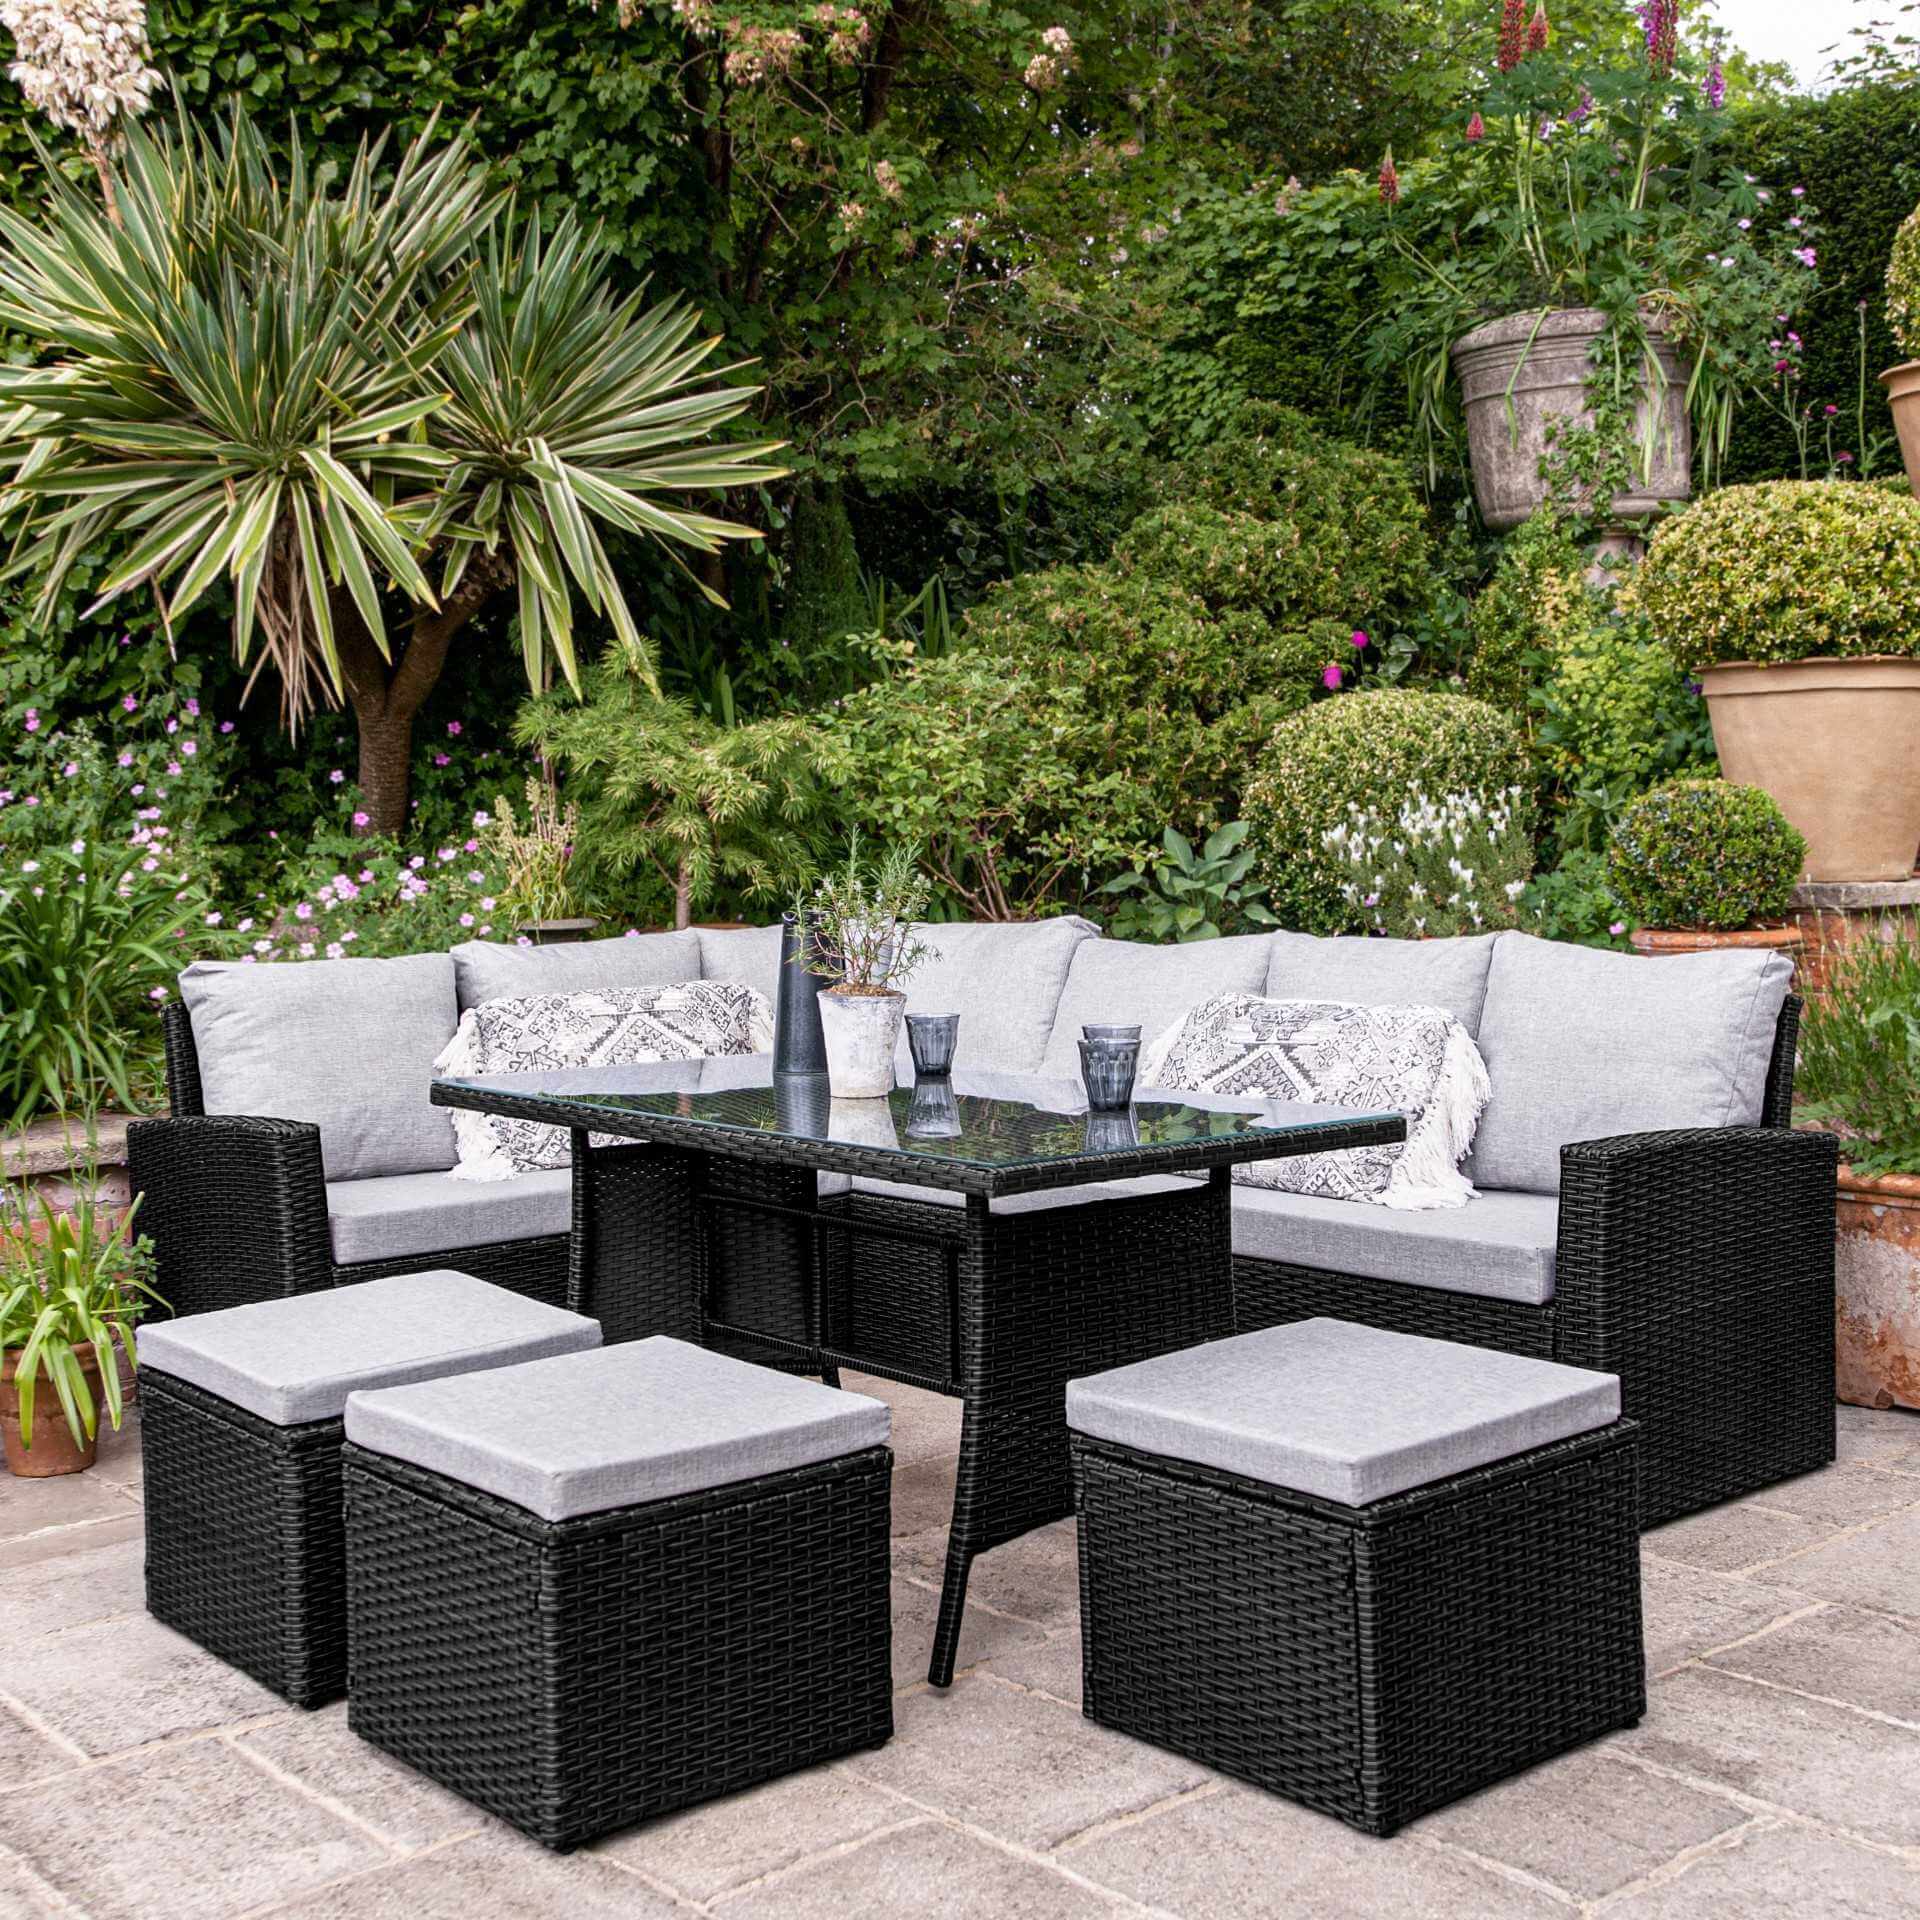 9 Seater Rattan Outdoor Corner Sofa Set with Lean Over Parasol and Base - Black Weave - Laura James